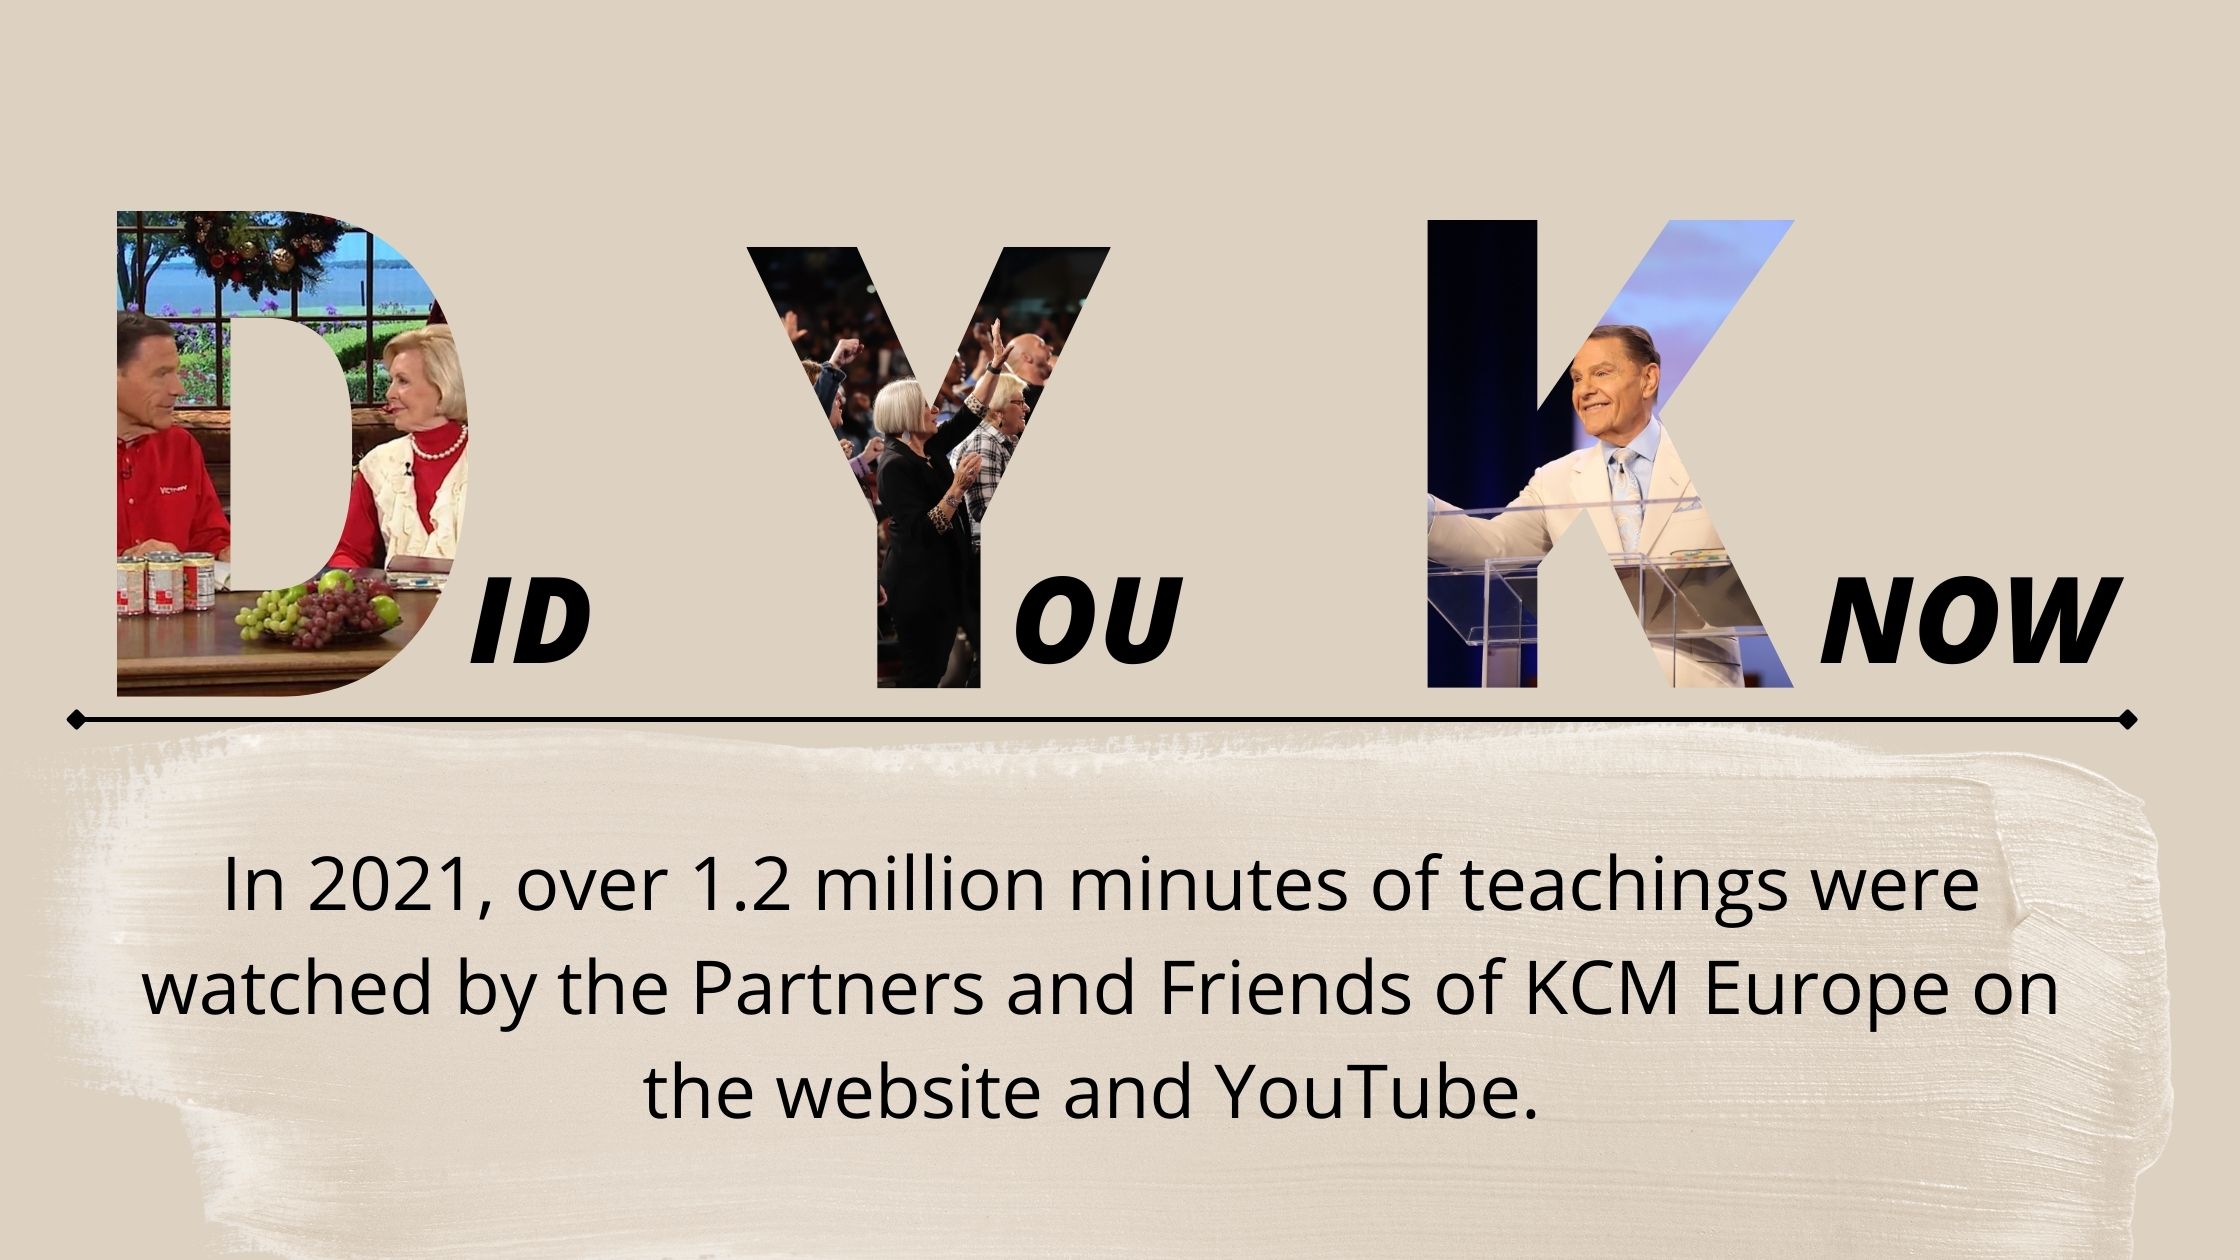 Did you know - teaching Kenneth Copeland